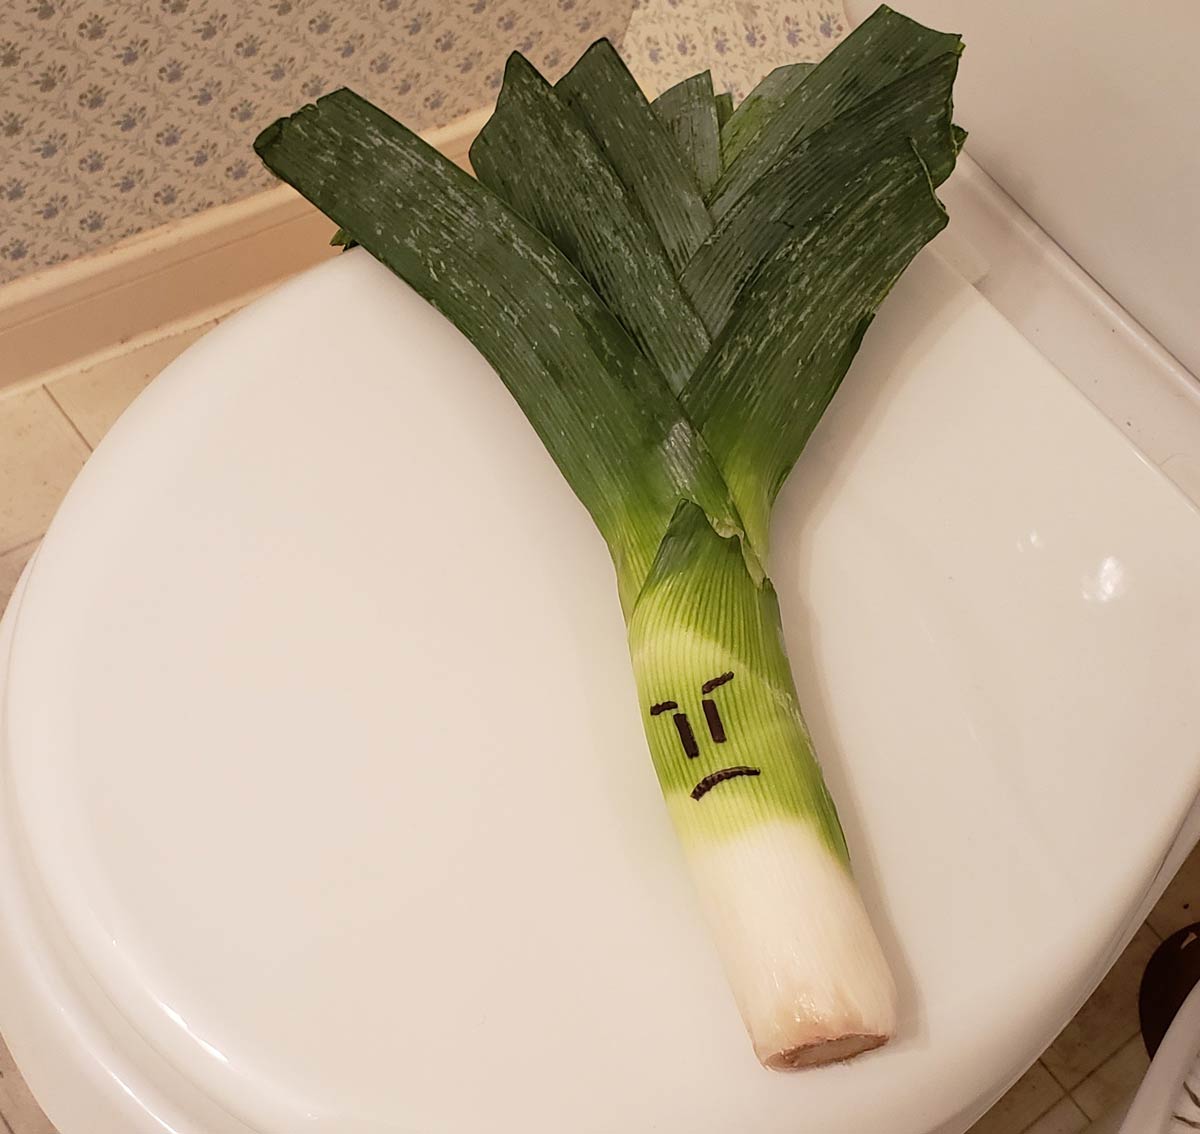 Told my parents there was a serious leak in their bathroom, they were not amused